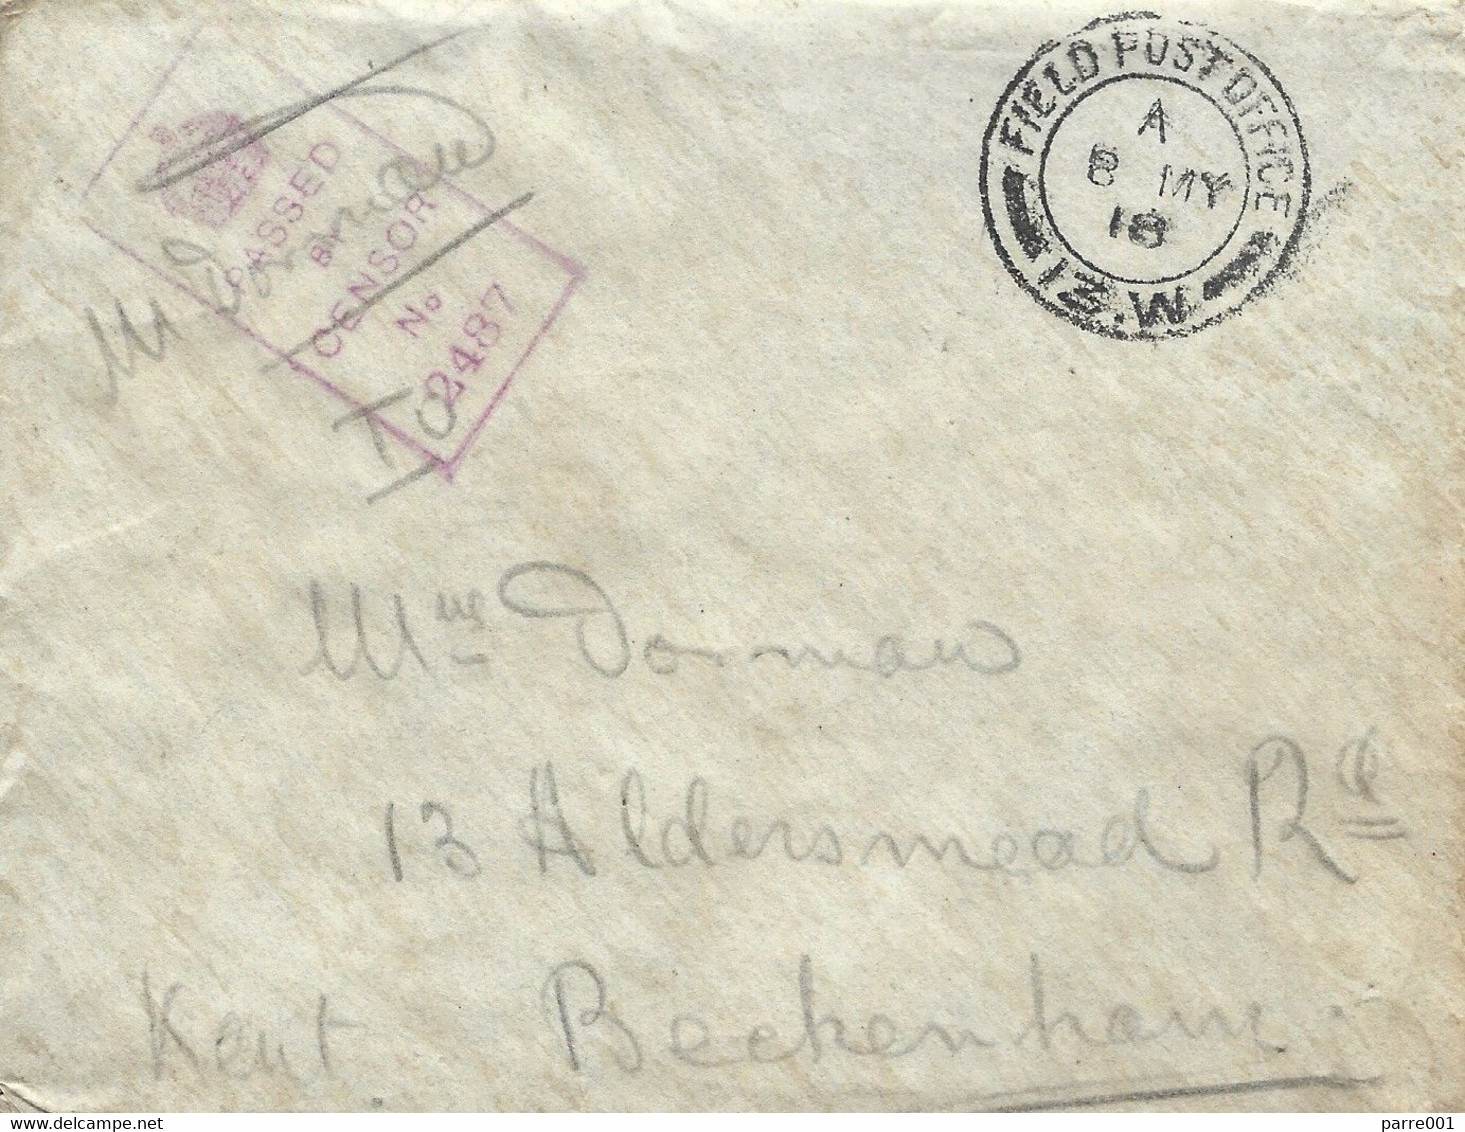 UK GB 1918 FPO 13.W France 11th Australian Brigade Censor 2487 OAS Forces Cover - Covers & Documents